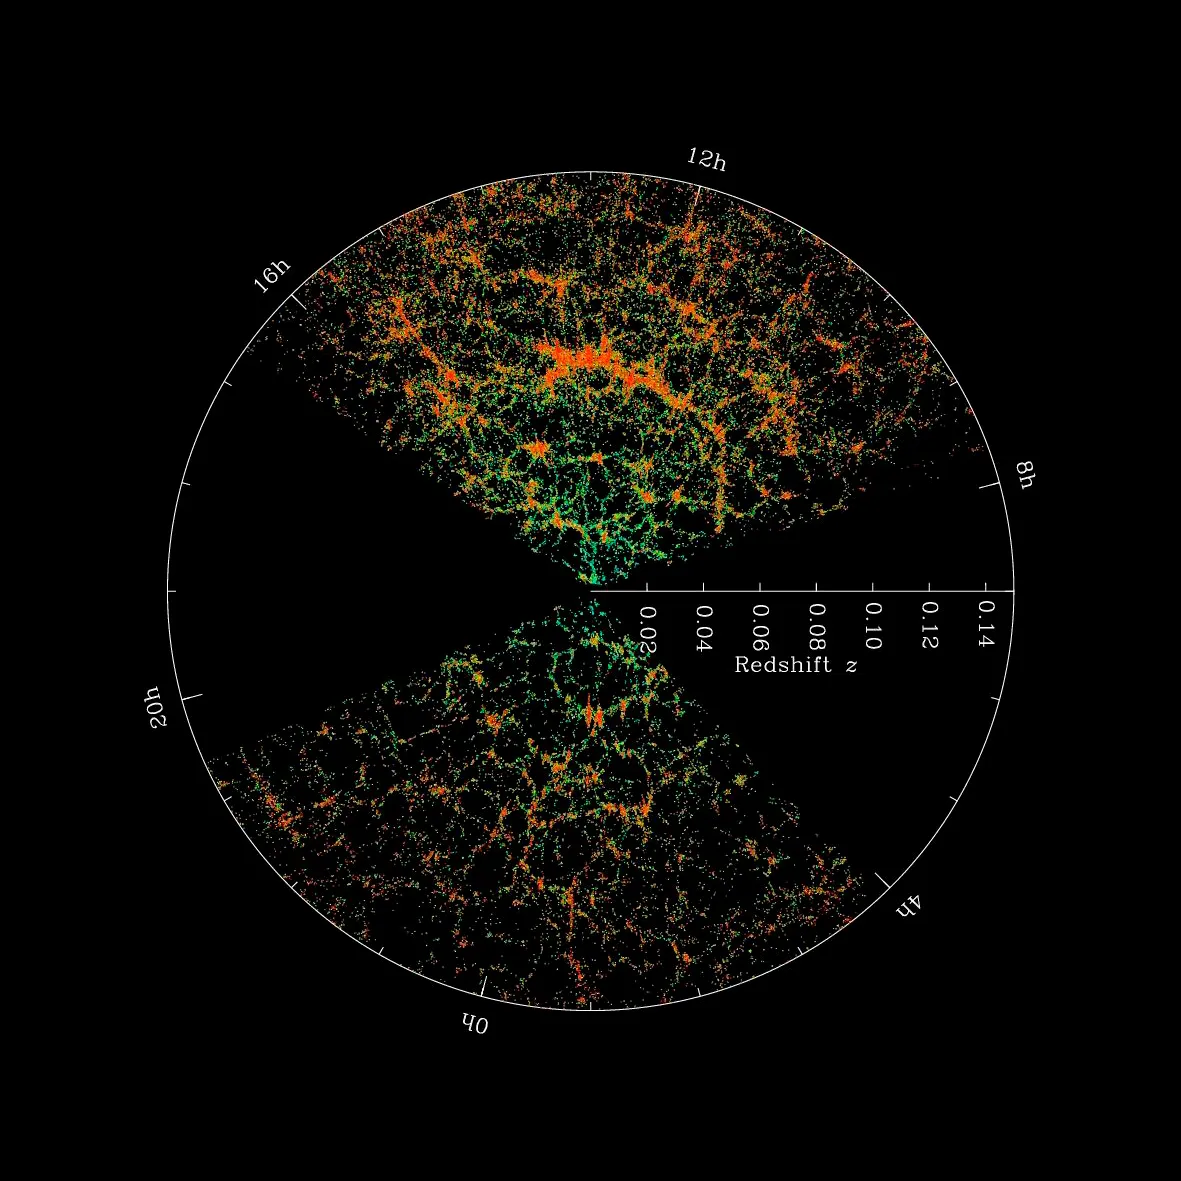 The Sloan Digital Sky Survey, the largest 3D map of the cosmos to date. Credit: Image Credit: M. Blanton and SDSS